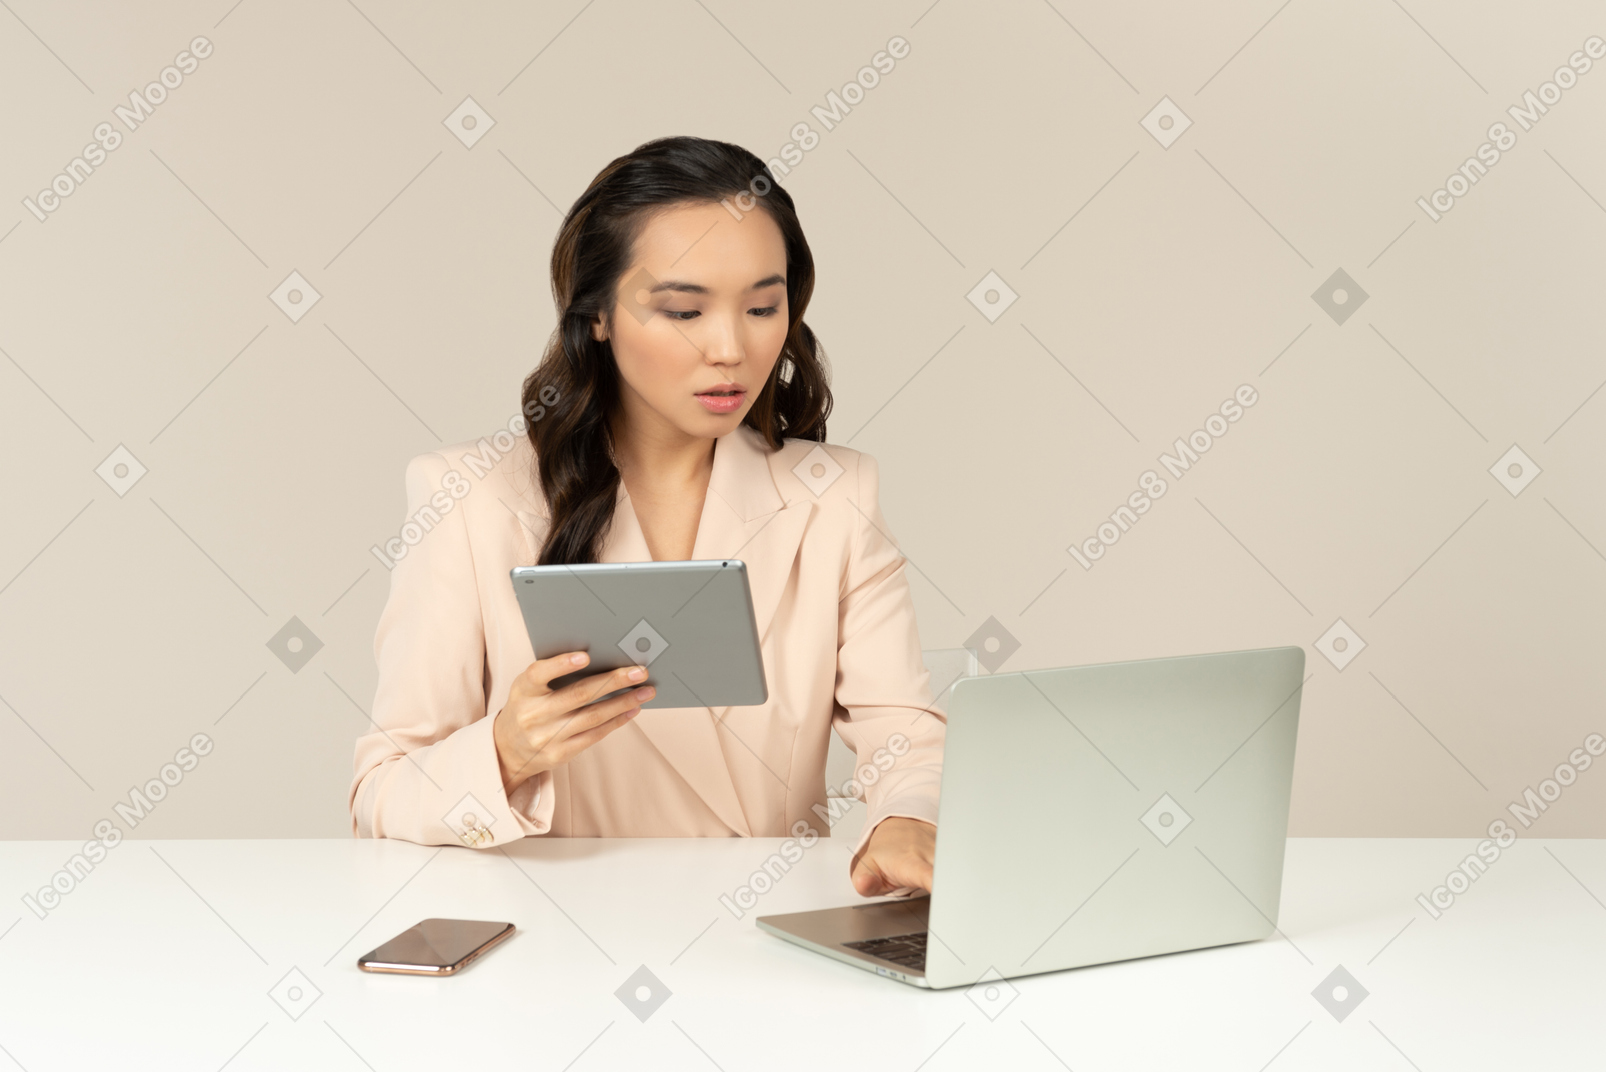 Asian female office employee working on laptop and holding tablet